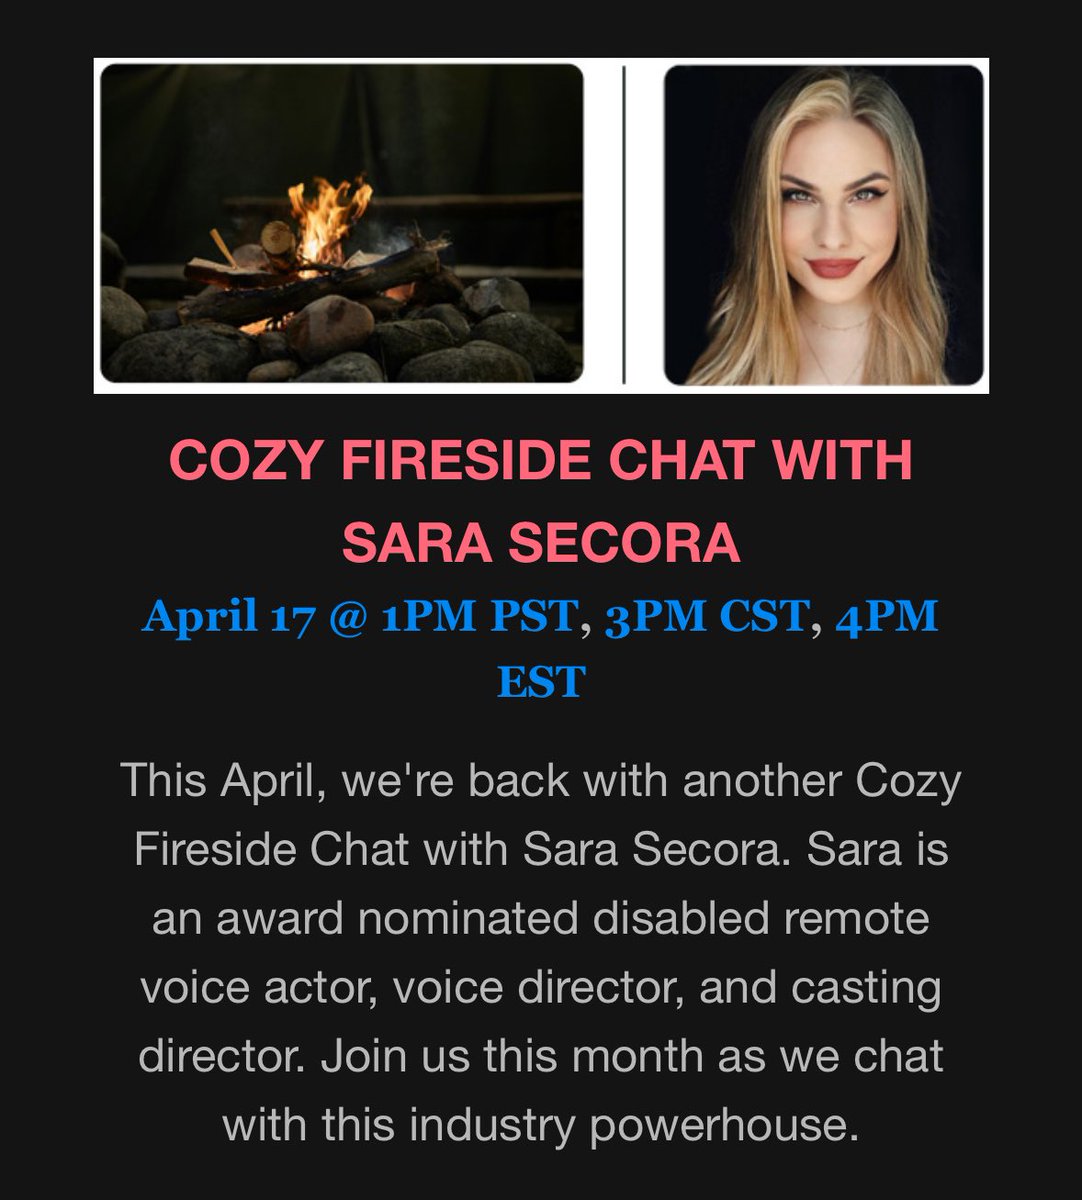 Thank you to the Disabled Voice Actors Database for having me as this month’s Fireside chat speaker. Looking forward to chatting today!!